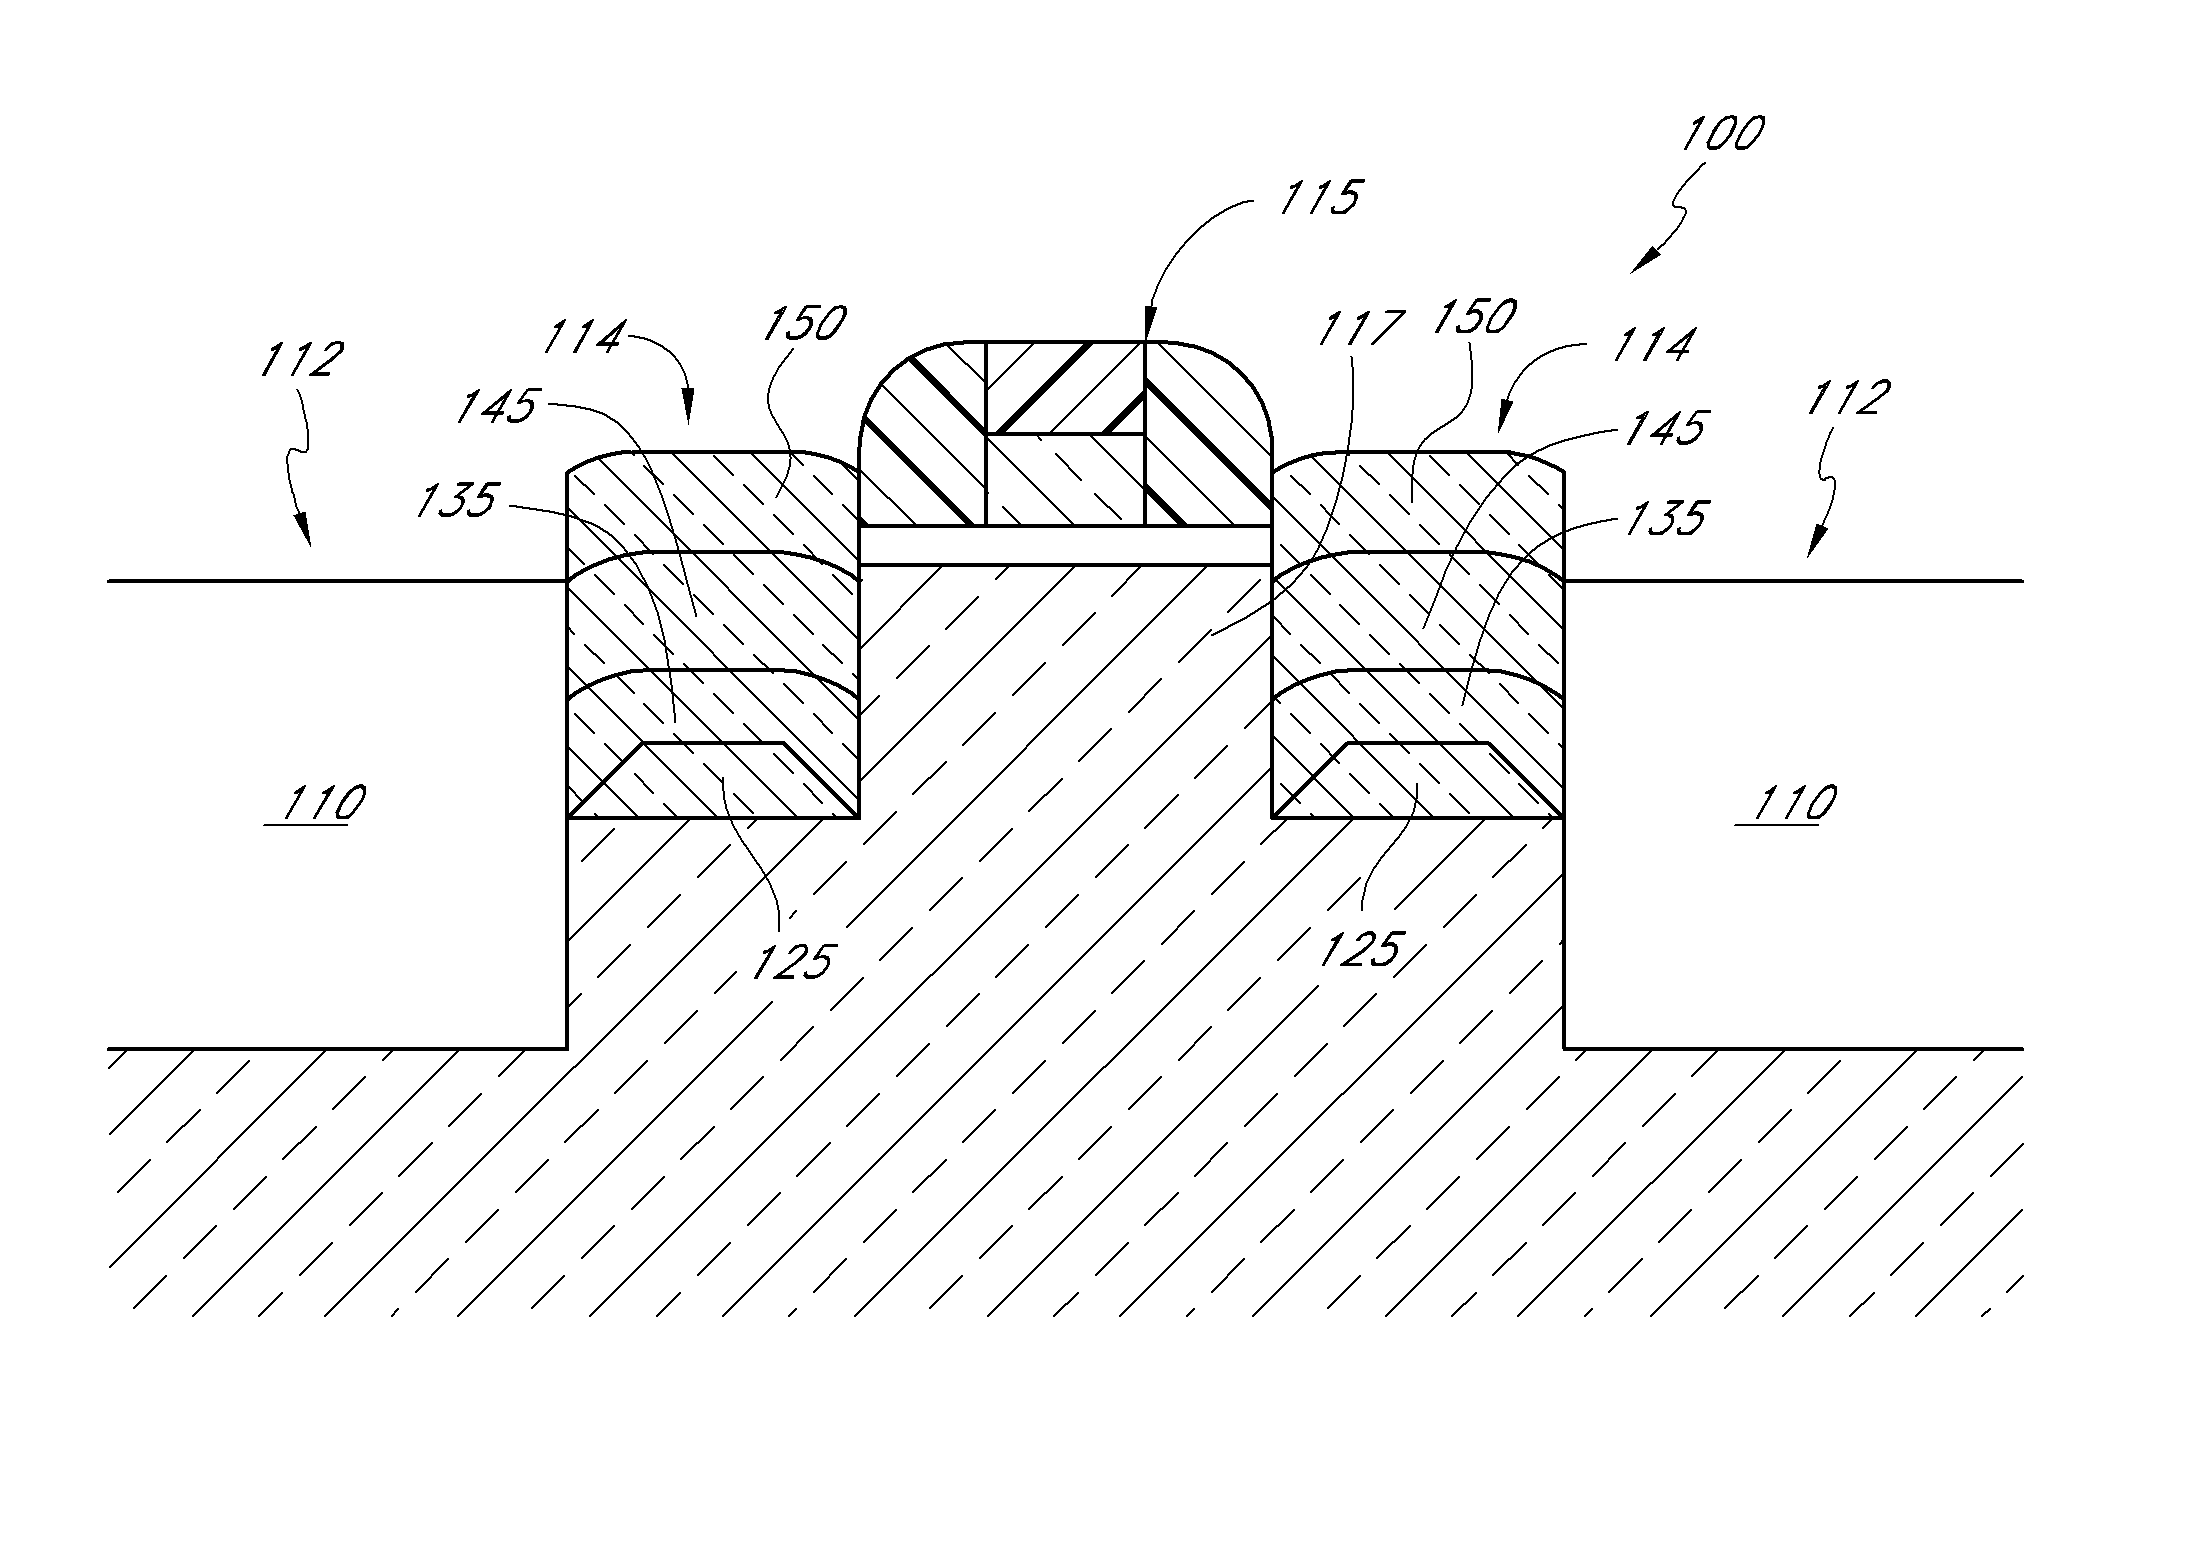 Cyclical epitaxial deposition and etch